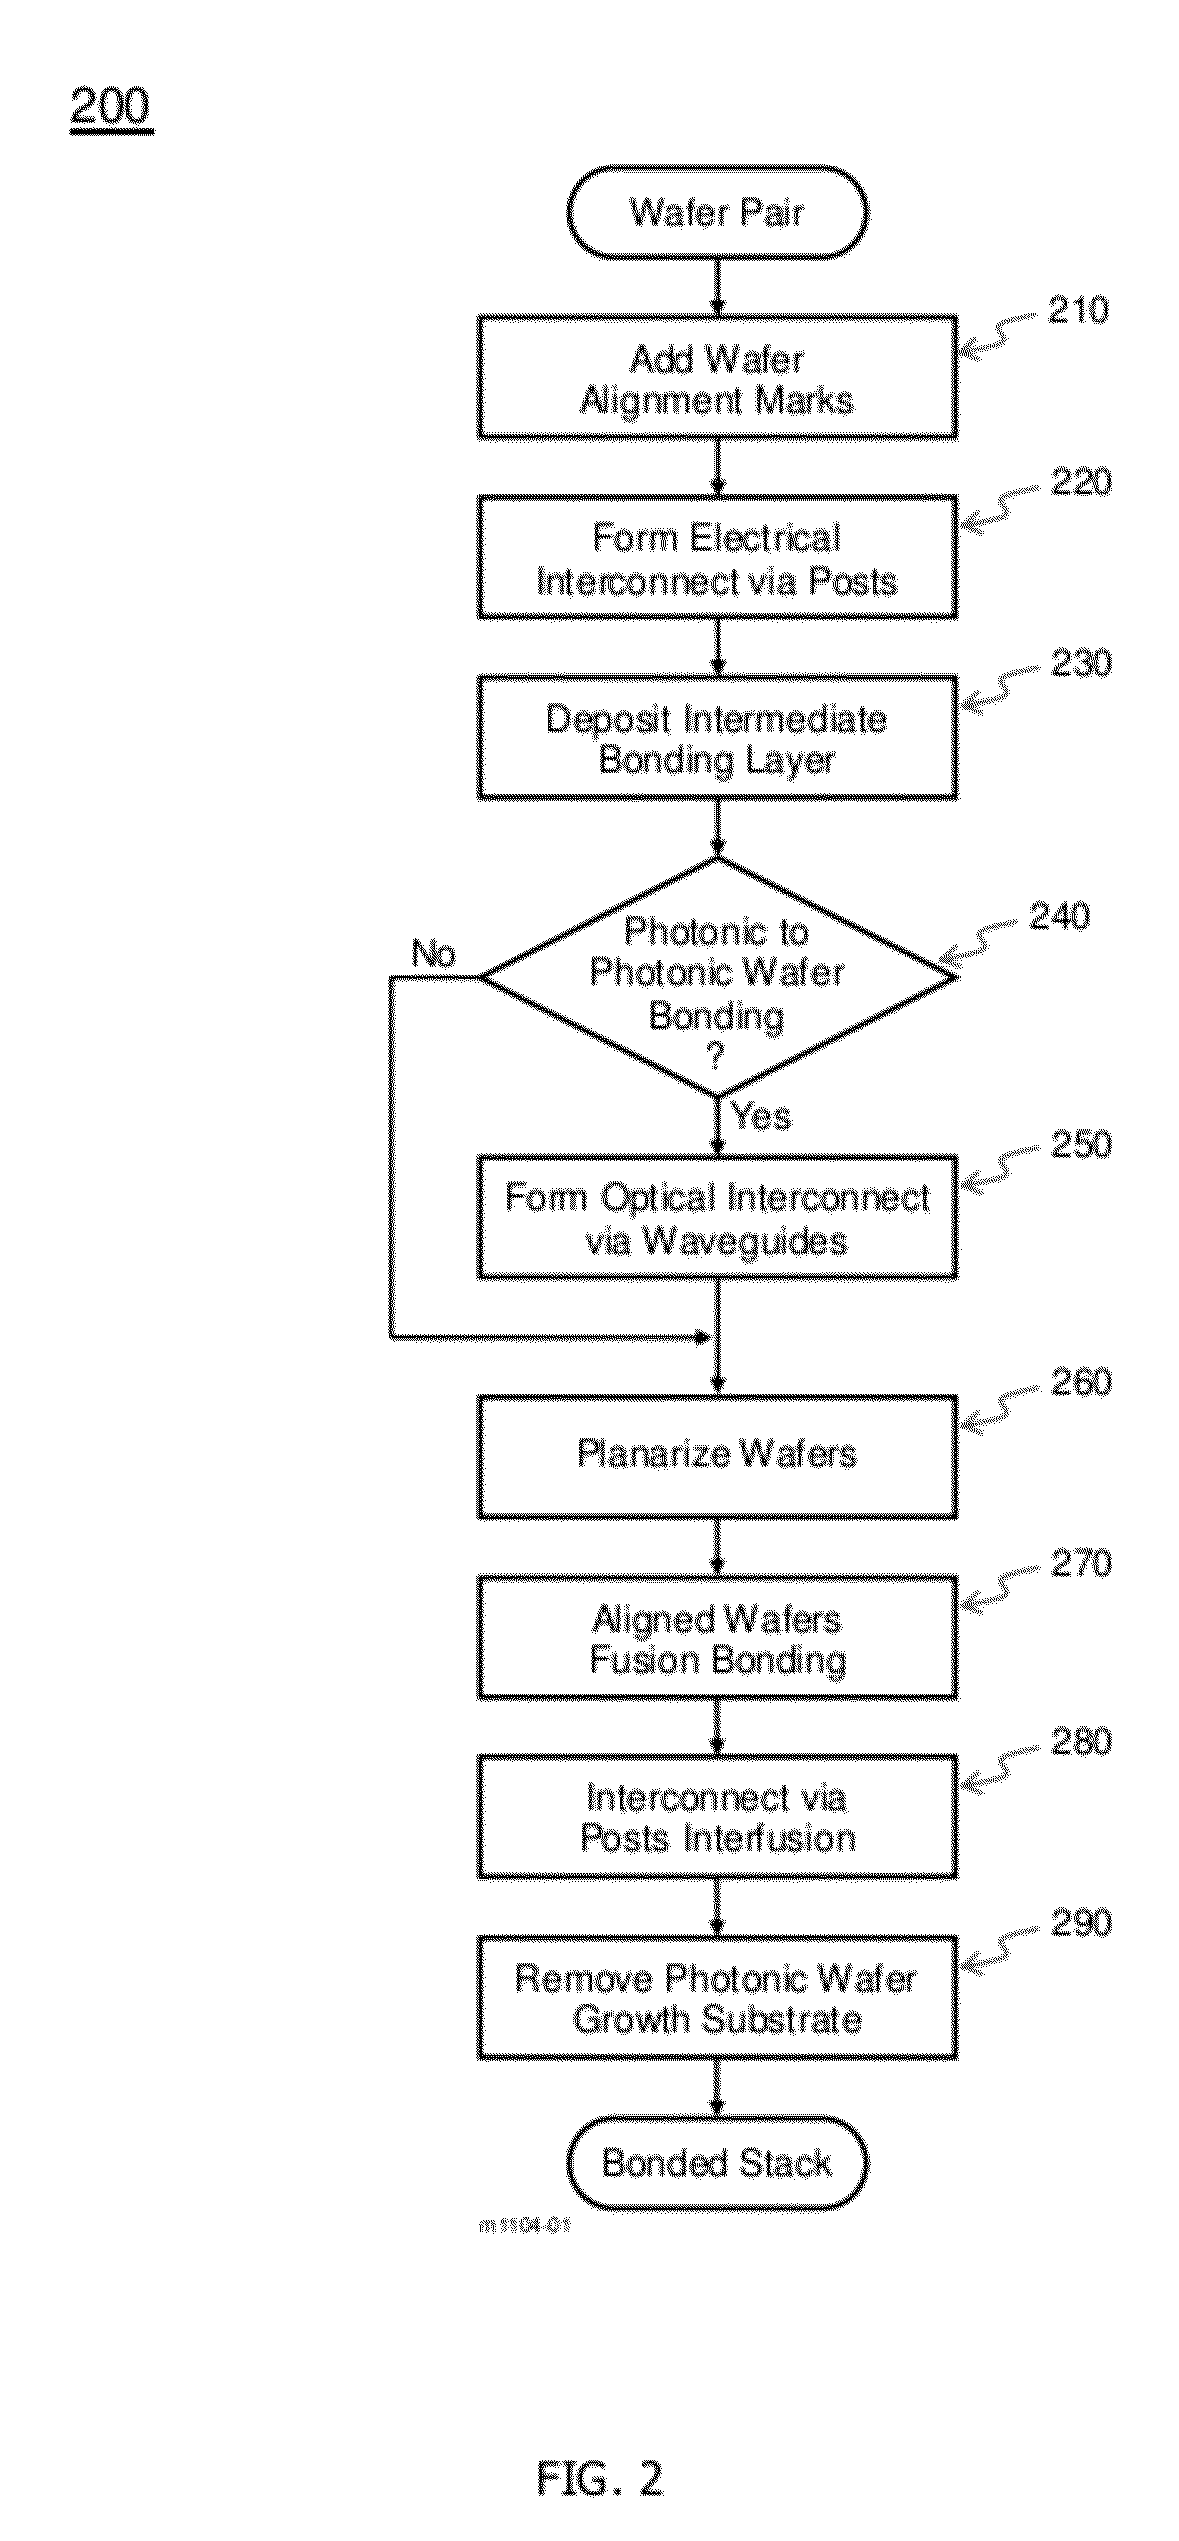 Semiconductor Wafer Bonding Incorporating Electrical and Optical Interconnects